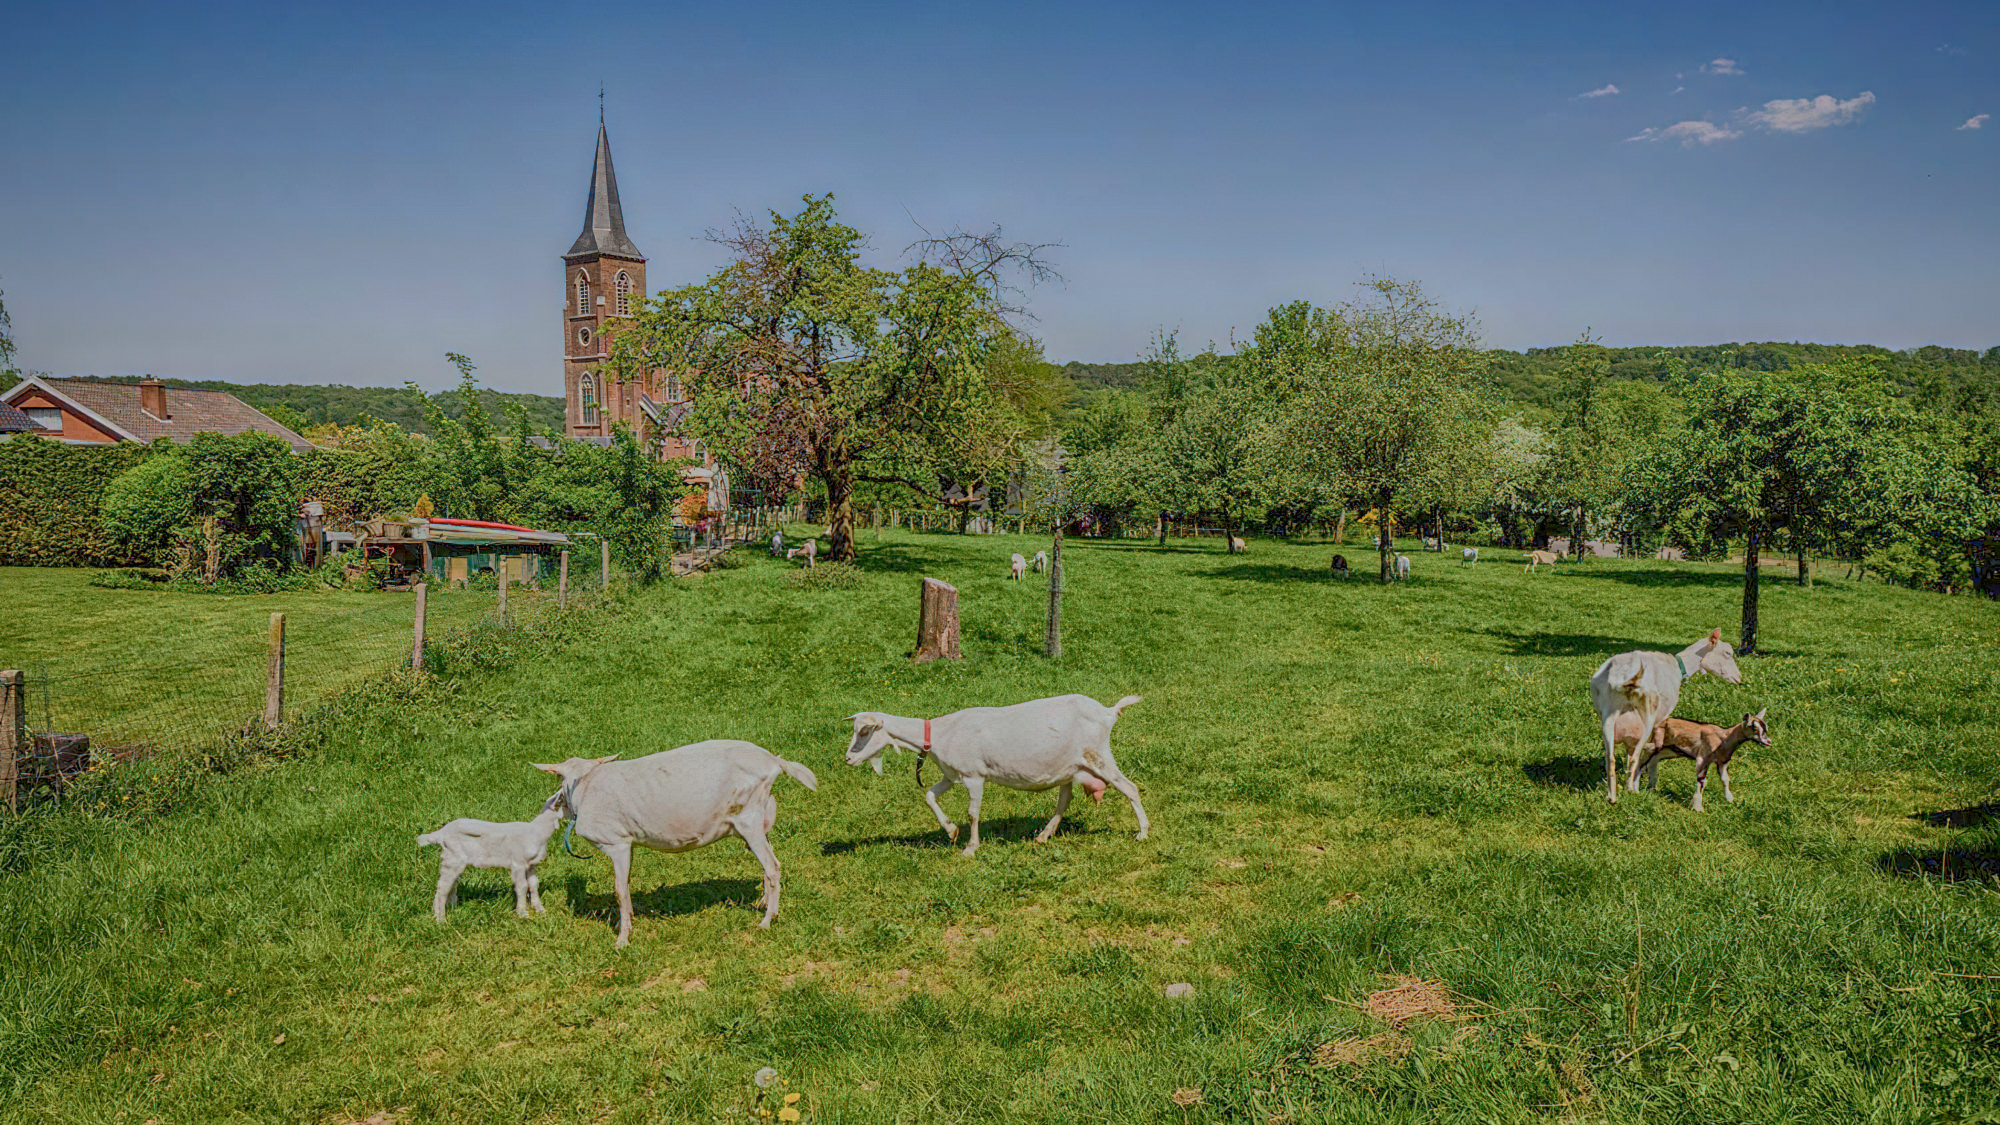 Goats graze in the meadow behind Mostert Hoeve.